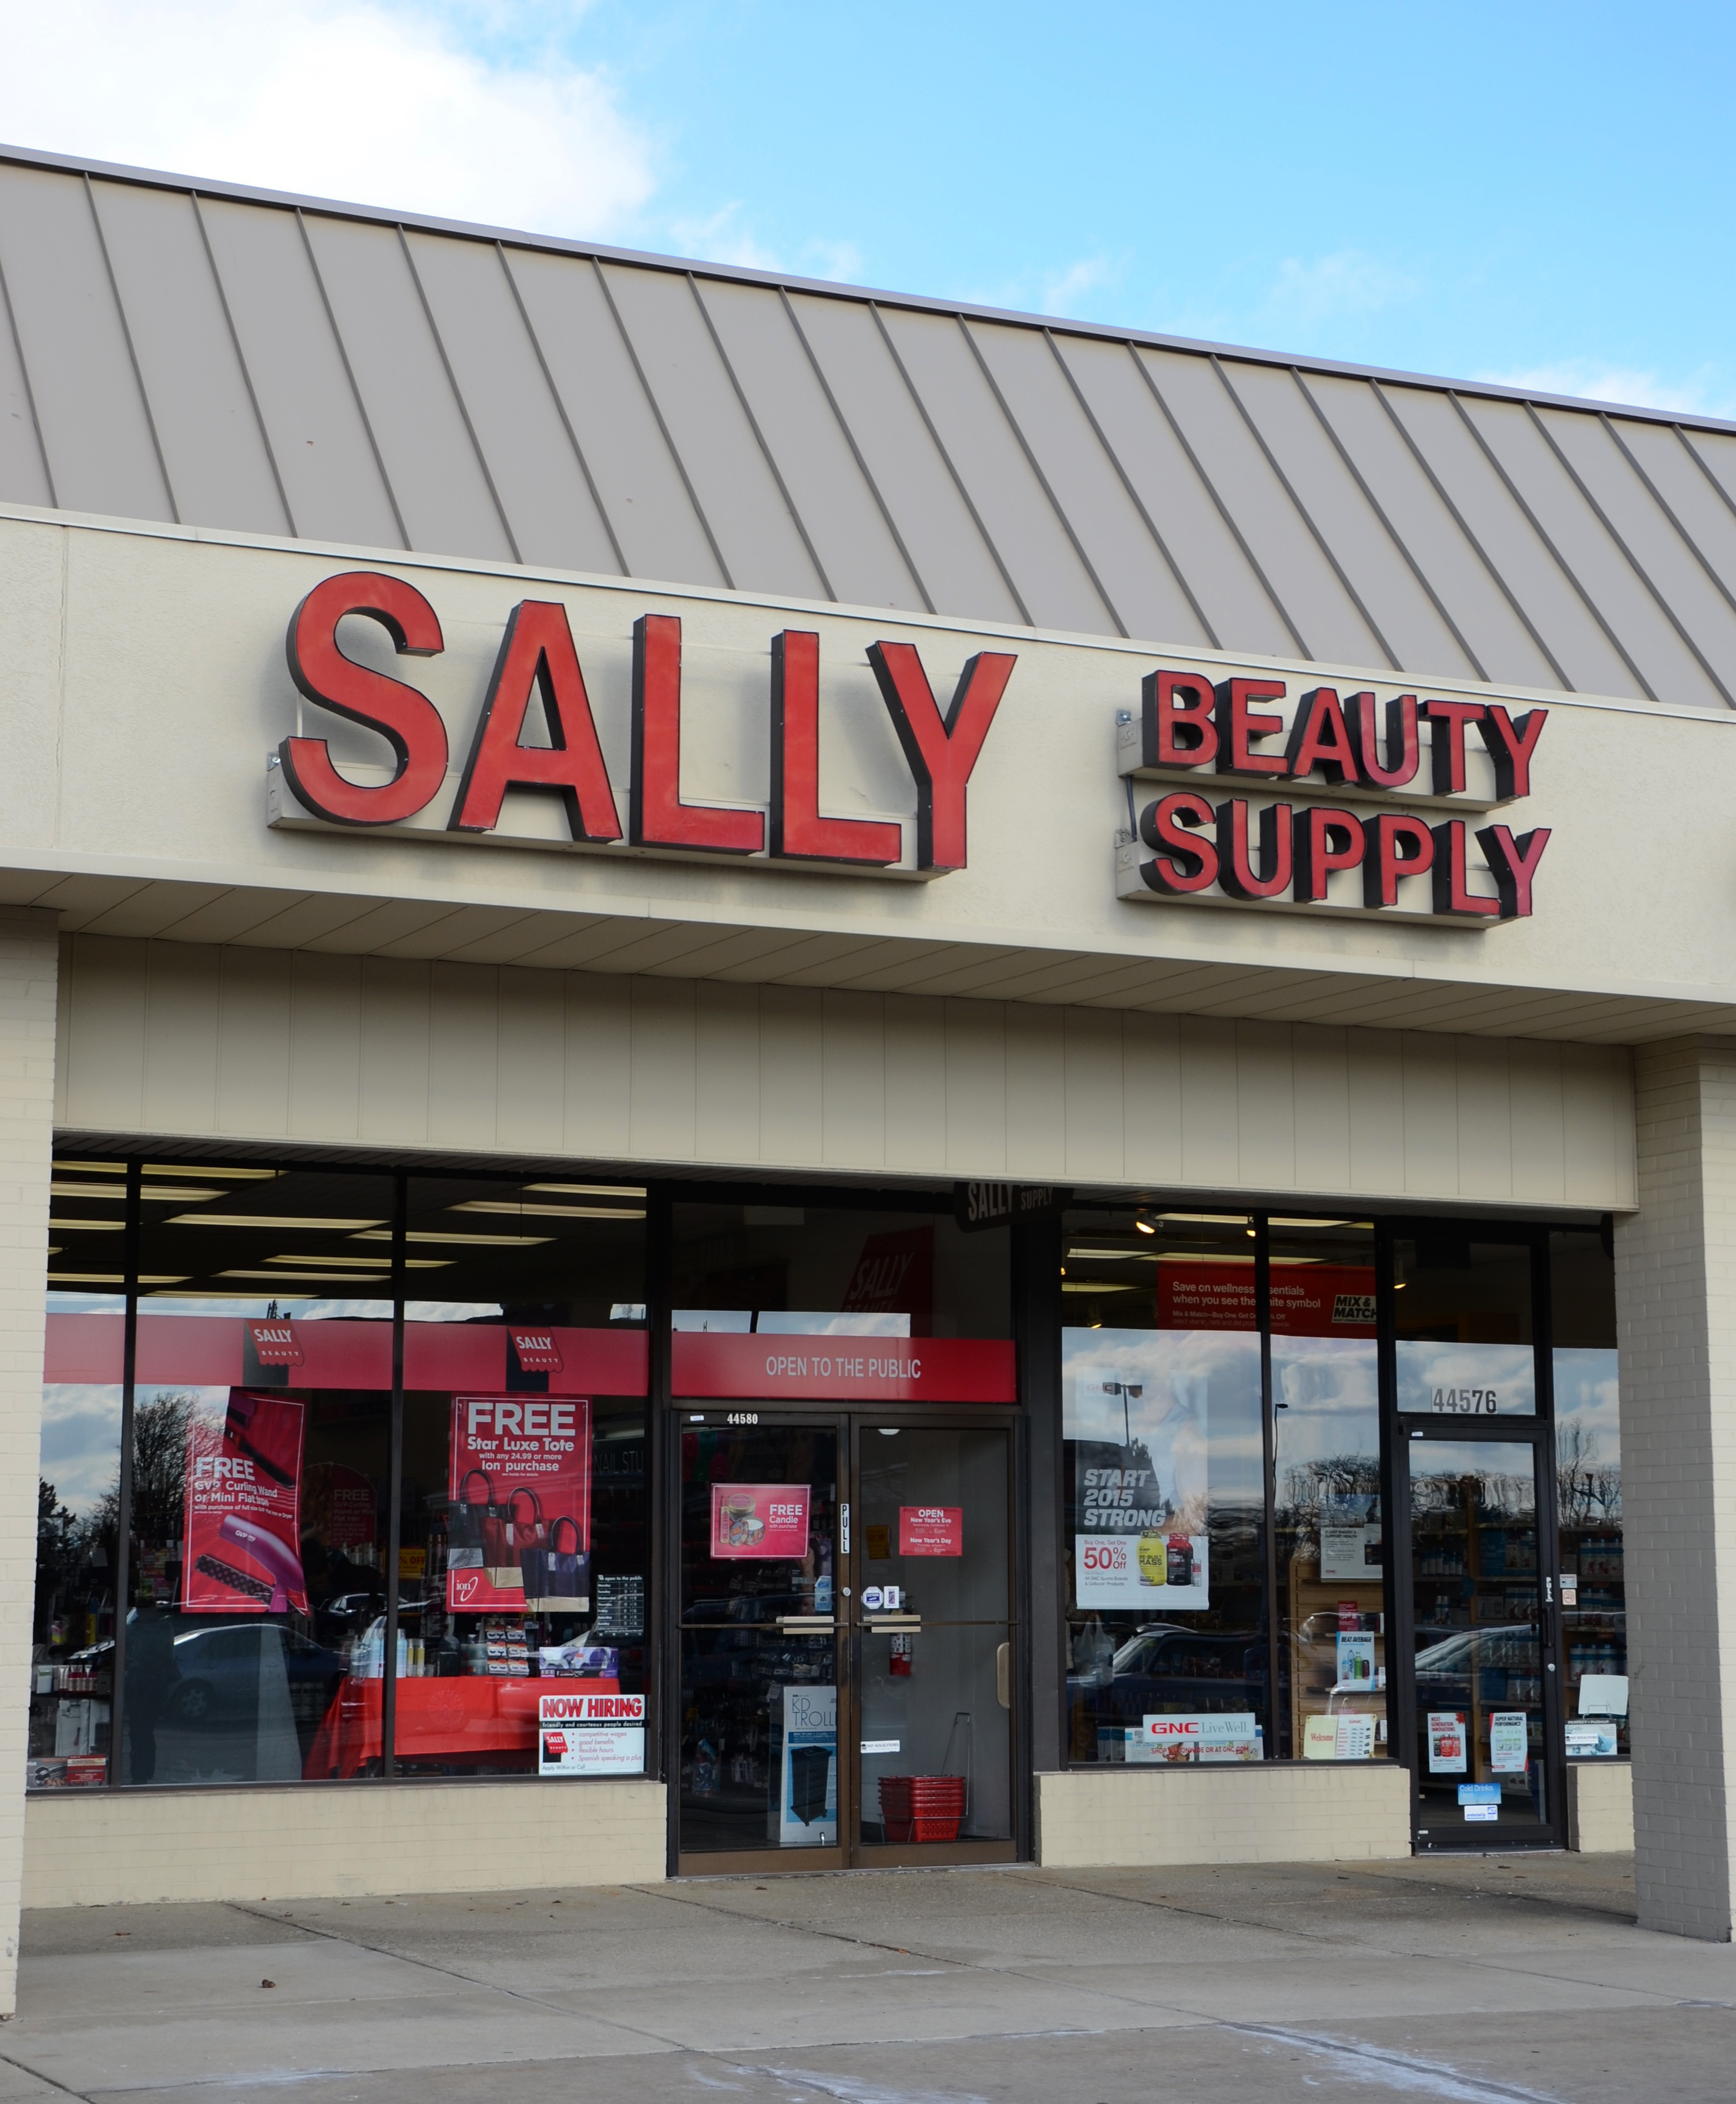 How do you find Sally's Beauty Supply store locations?